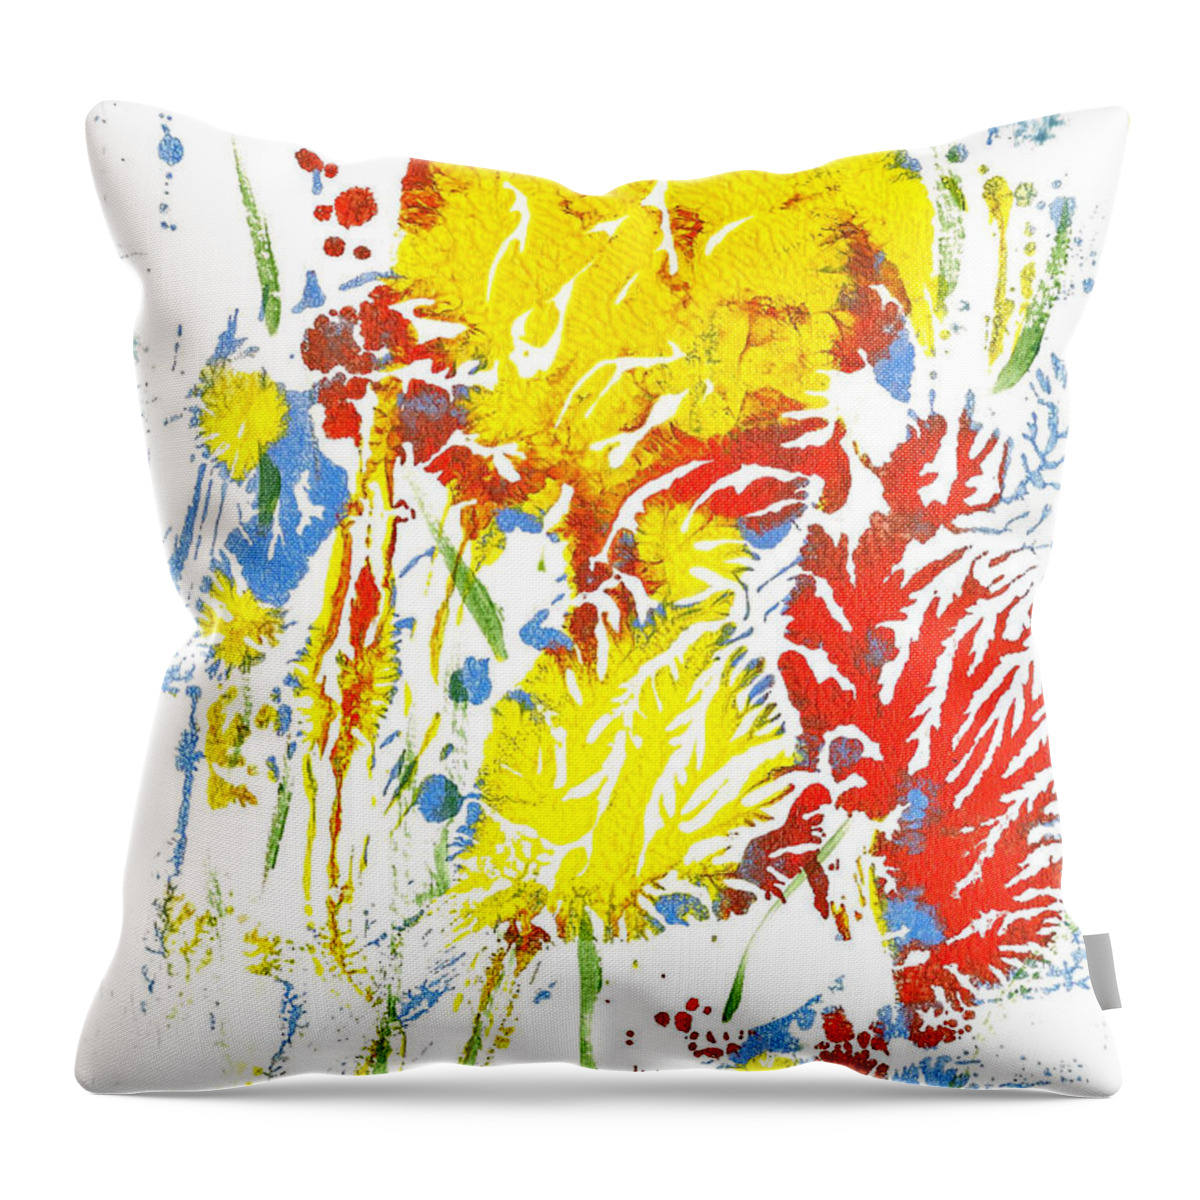 Cannah Flowers Blue Kites Throw Pillow featuring the painting Canna Lilies 1 #1 by Asha Sudhaker Shenoy